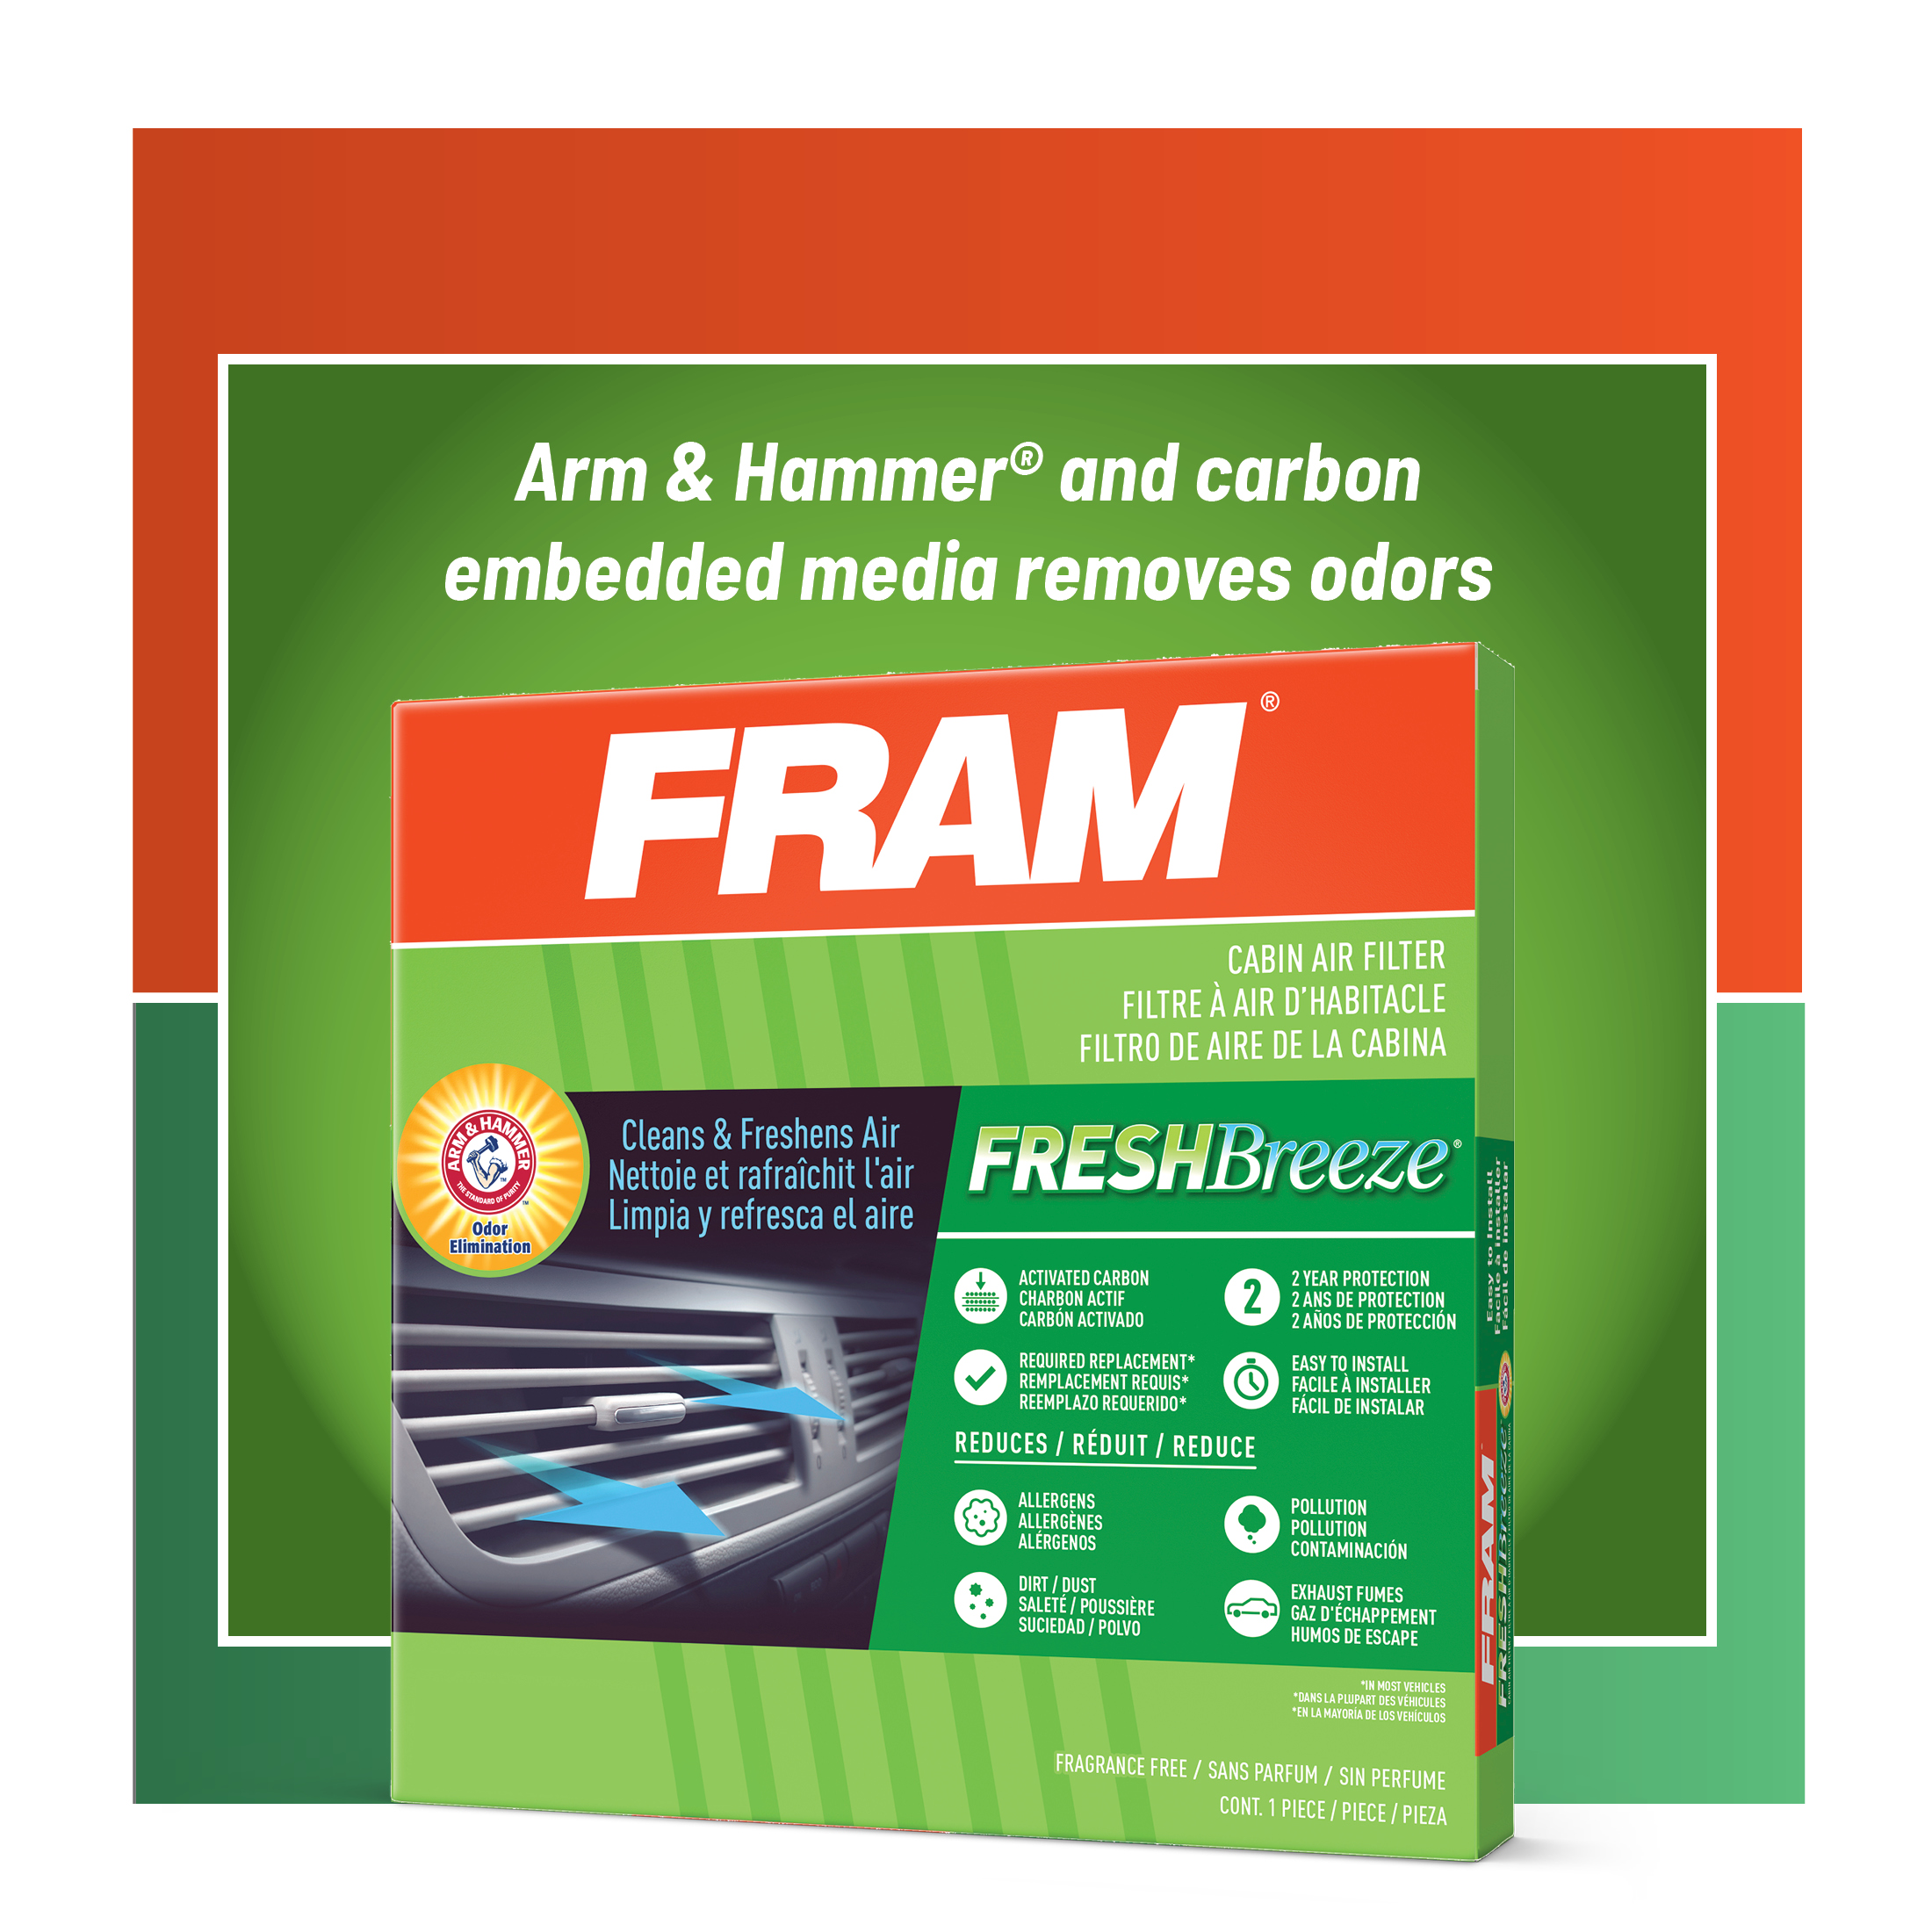 FRAM CF10828, Fresh Breeze Cabin Air Filter with Arm & Hammer Baking Soda, for Select Mercedes-Benz Vehicles Fits select: 2006-2013 MERCEDES-BENZ ML, 2007-2013 MERCEDES-BENZ GL - image 1 of 9